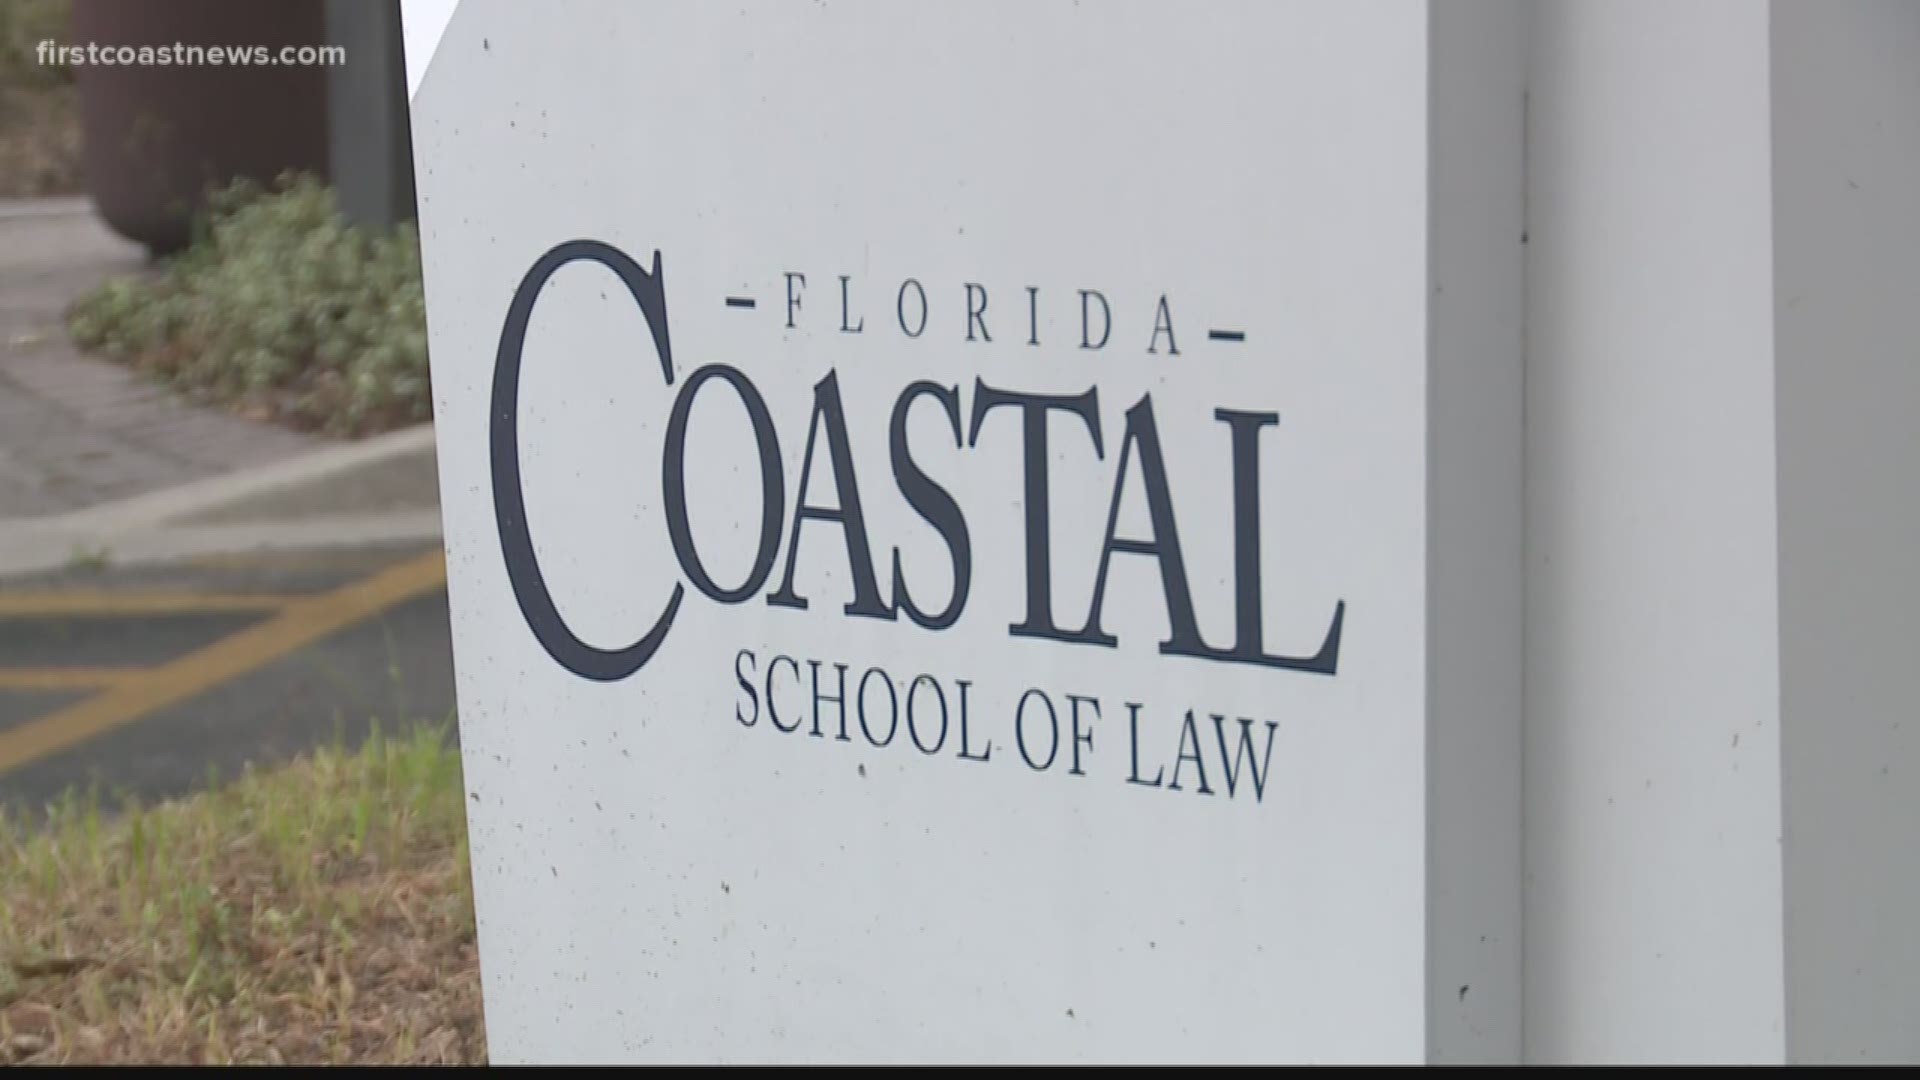 The dean at Florida Coastal School of Law in Jacksonville resigned Tuesday afternoon a day after learning the college was denied nonprofit status.